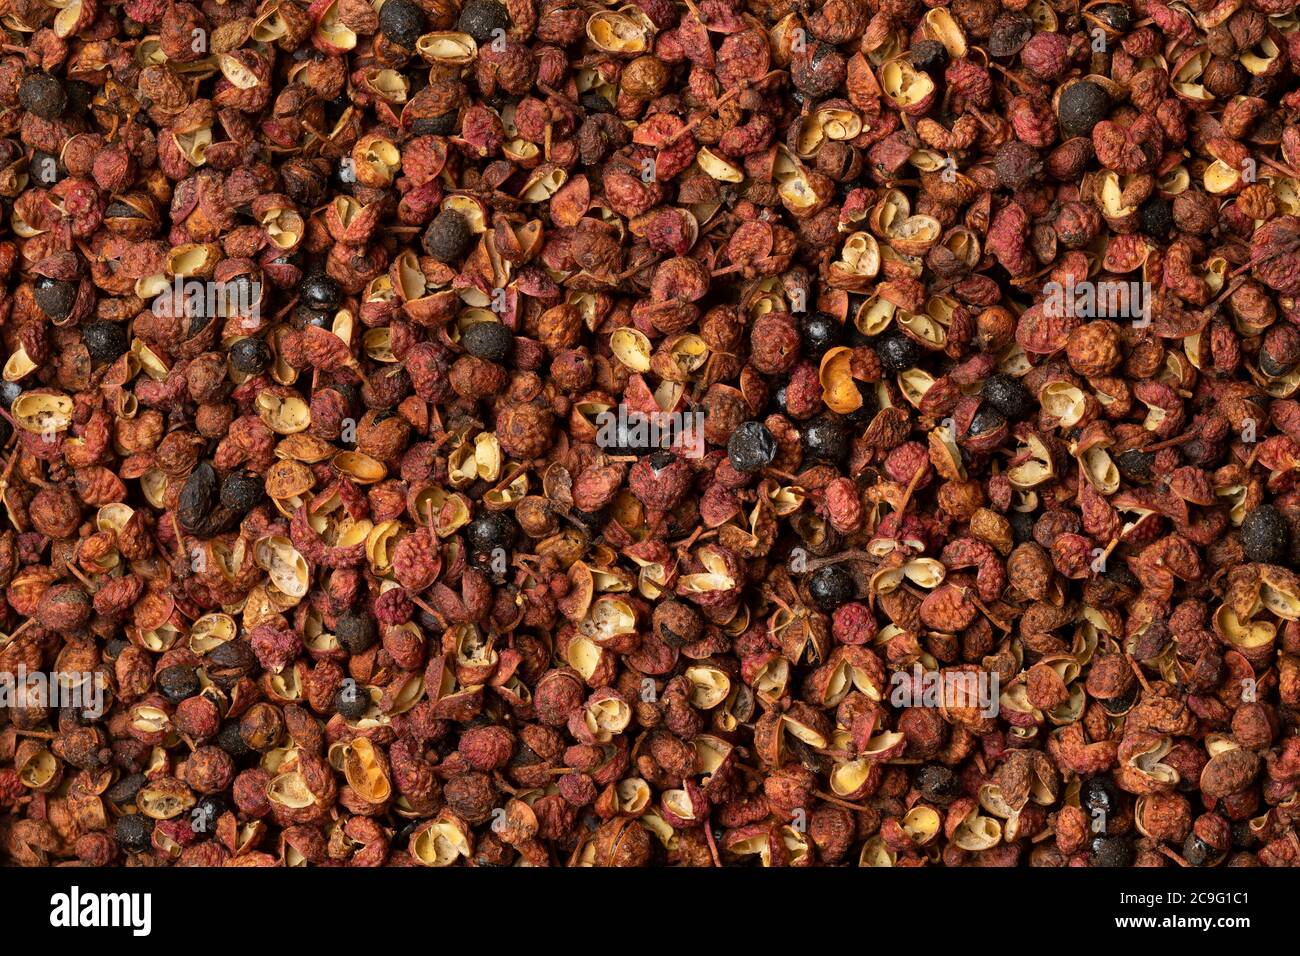 Dried Sichuan pepper seeds full frame Stock Photo